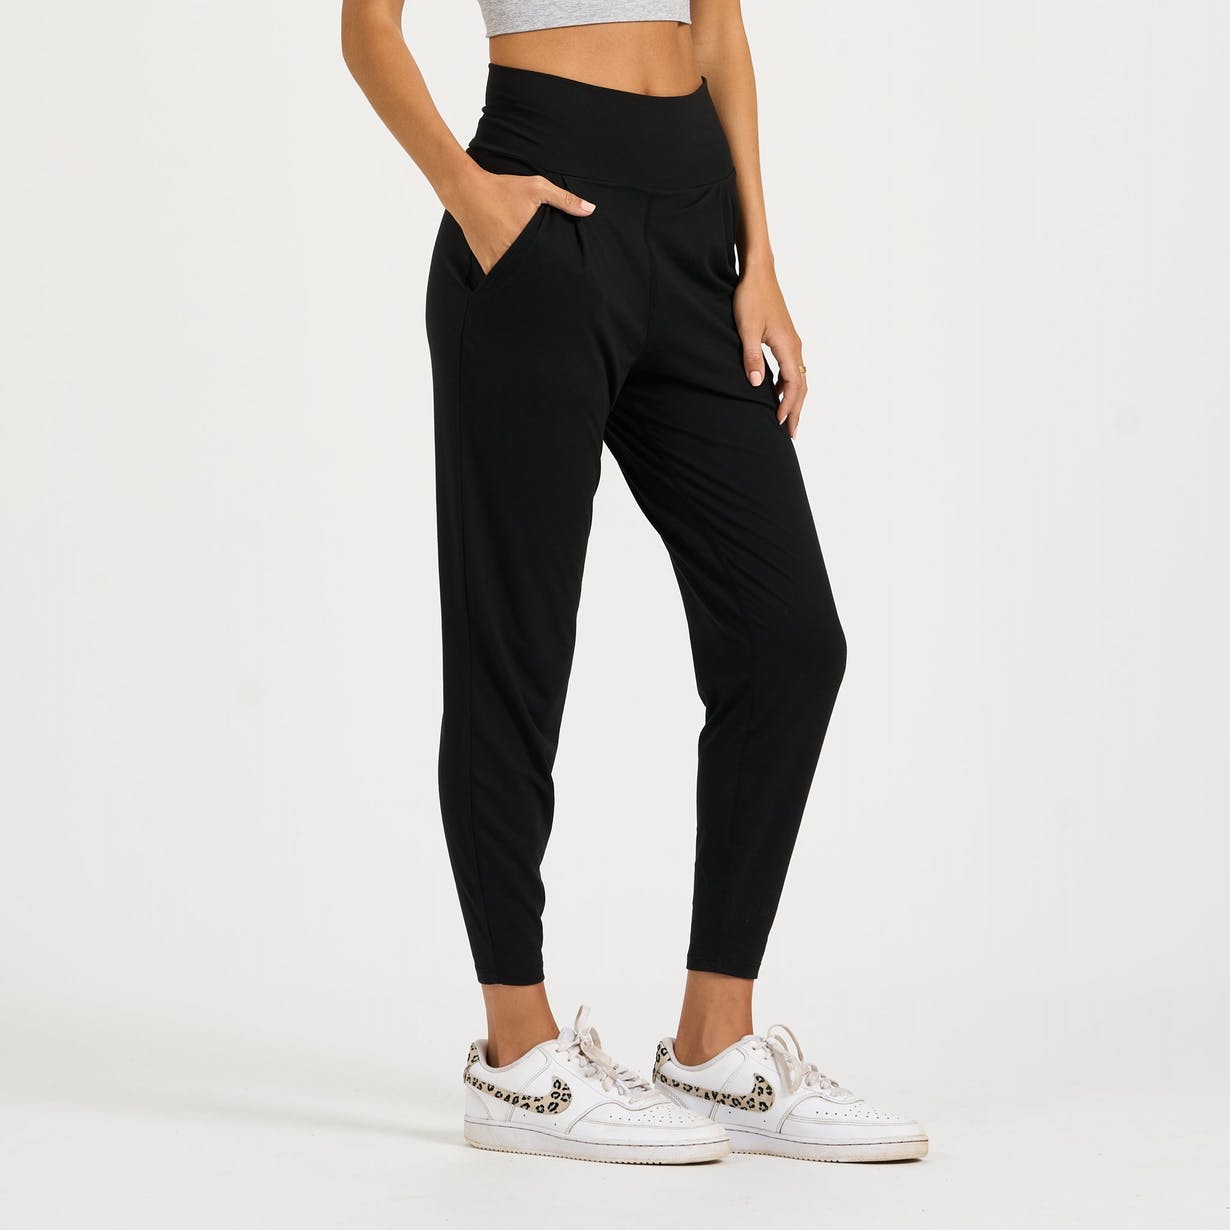 Brown Women's High-Waisted Pants: Shop up to −88%